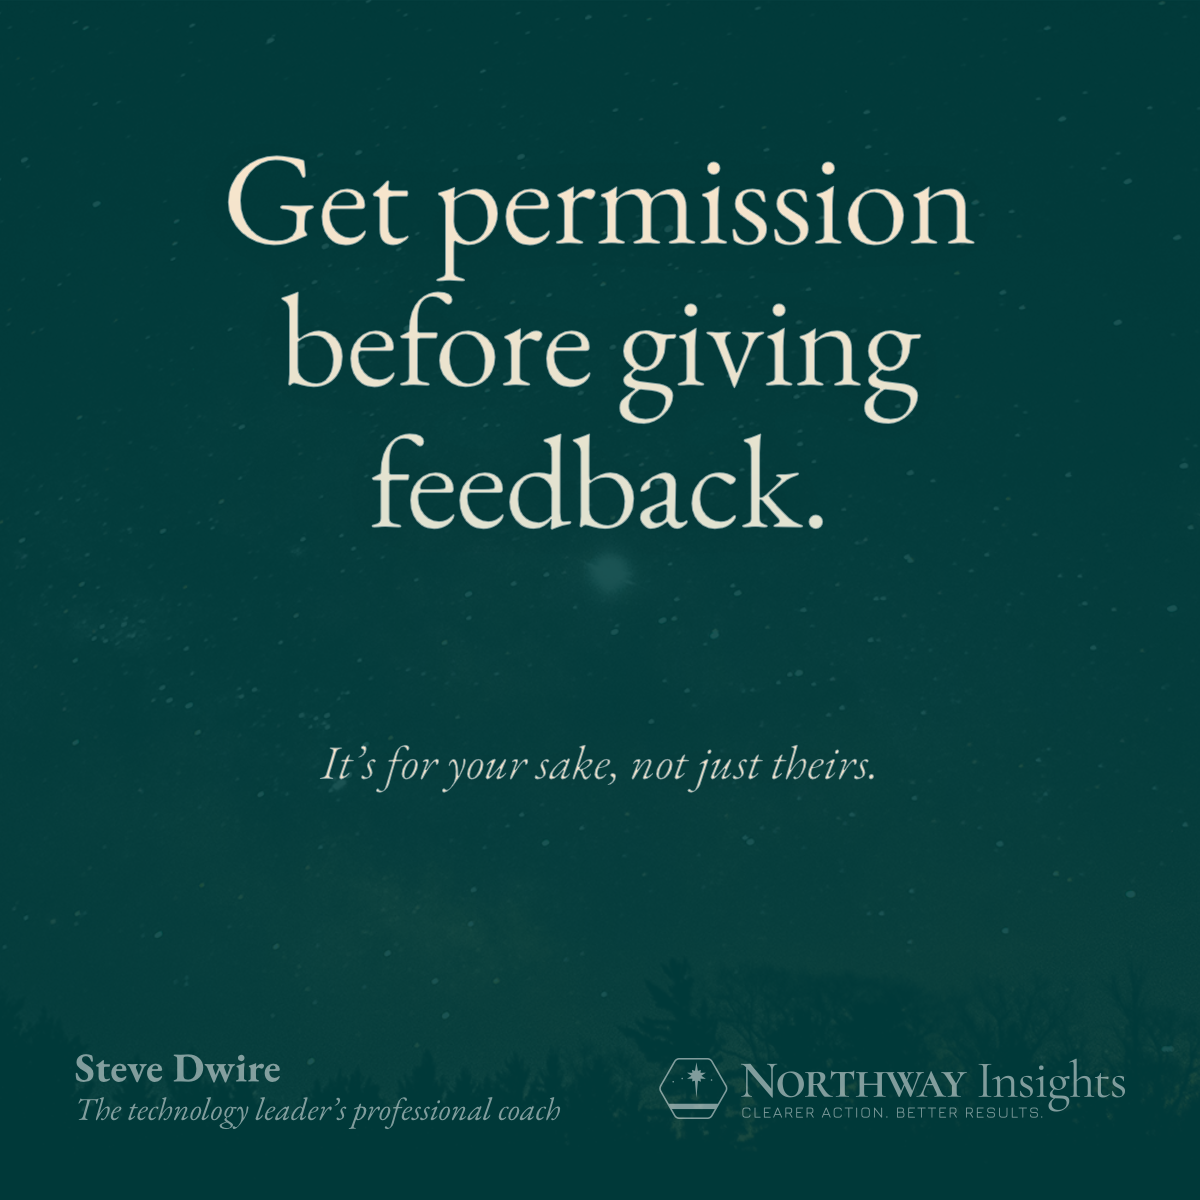 Get permission before giving feedback. (It's for your sake, not just theirs.)